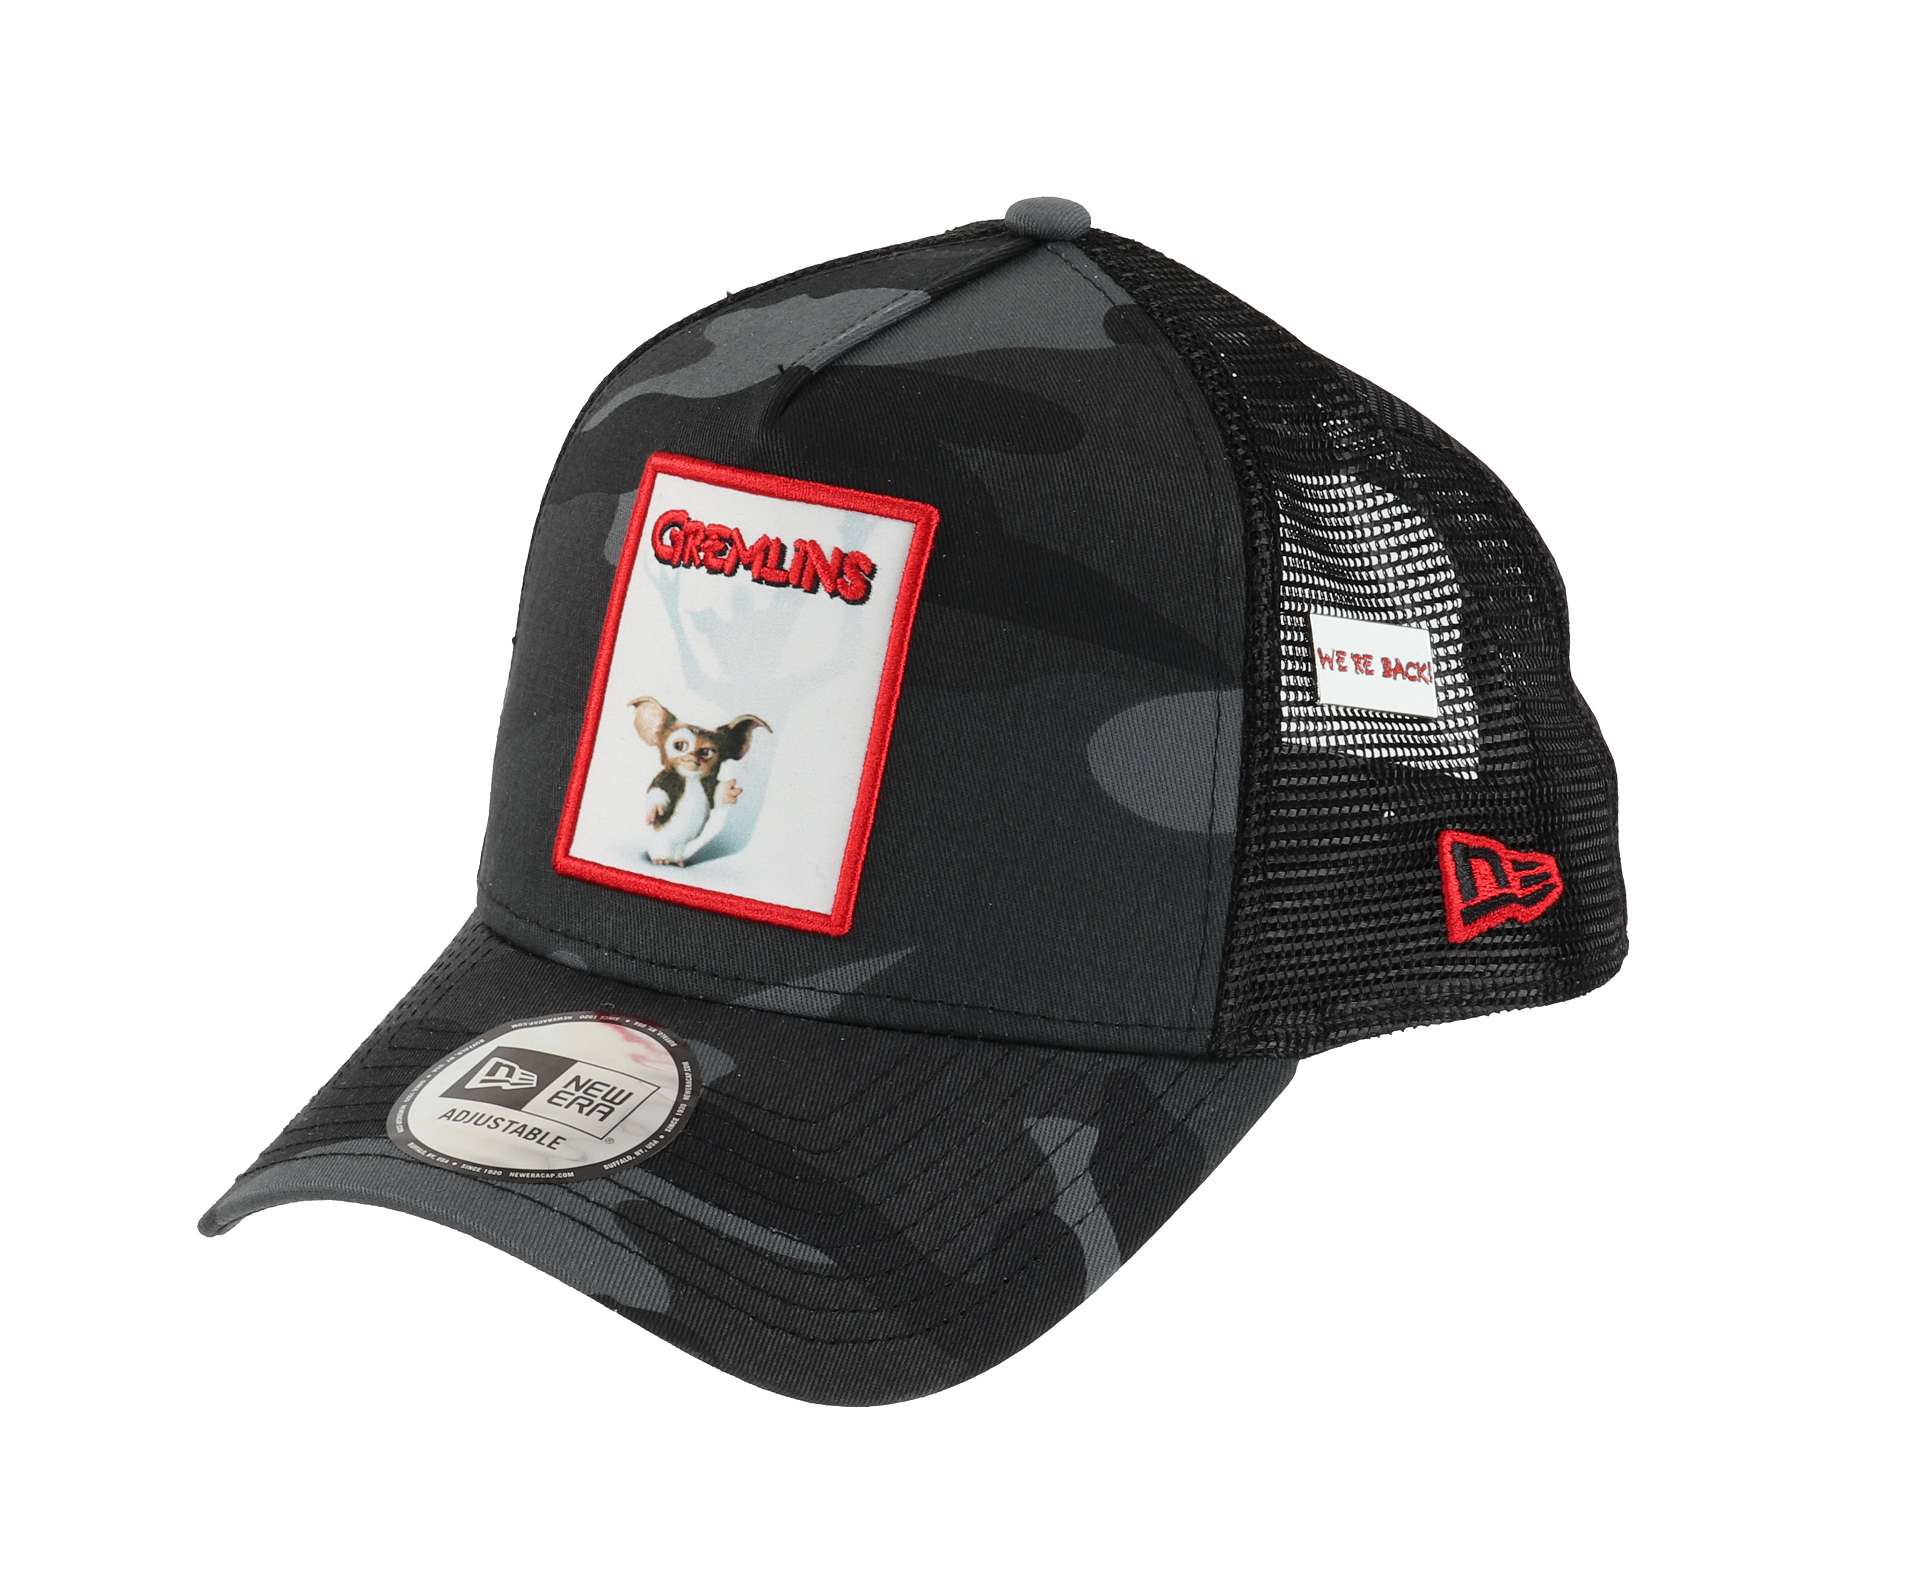 Gremlins Patch with Pin Camo-Black A-Frame Adjustable Trucker Cap New Era